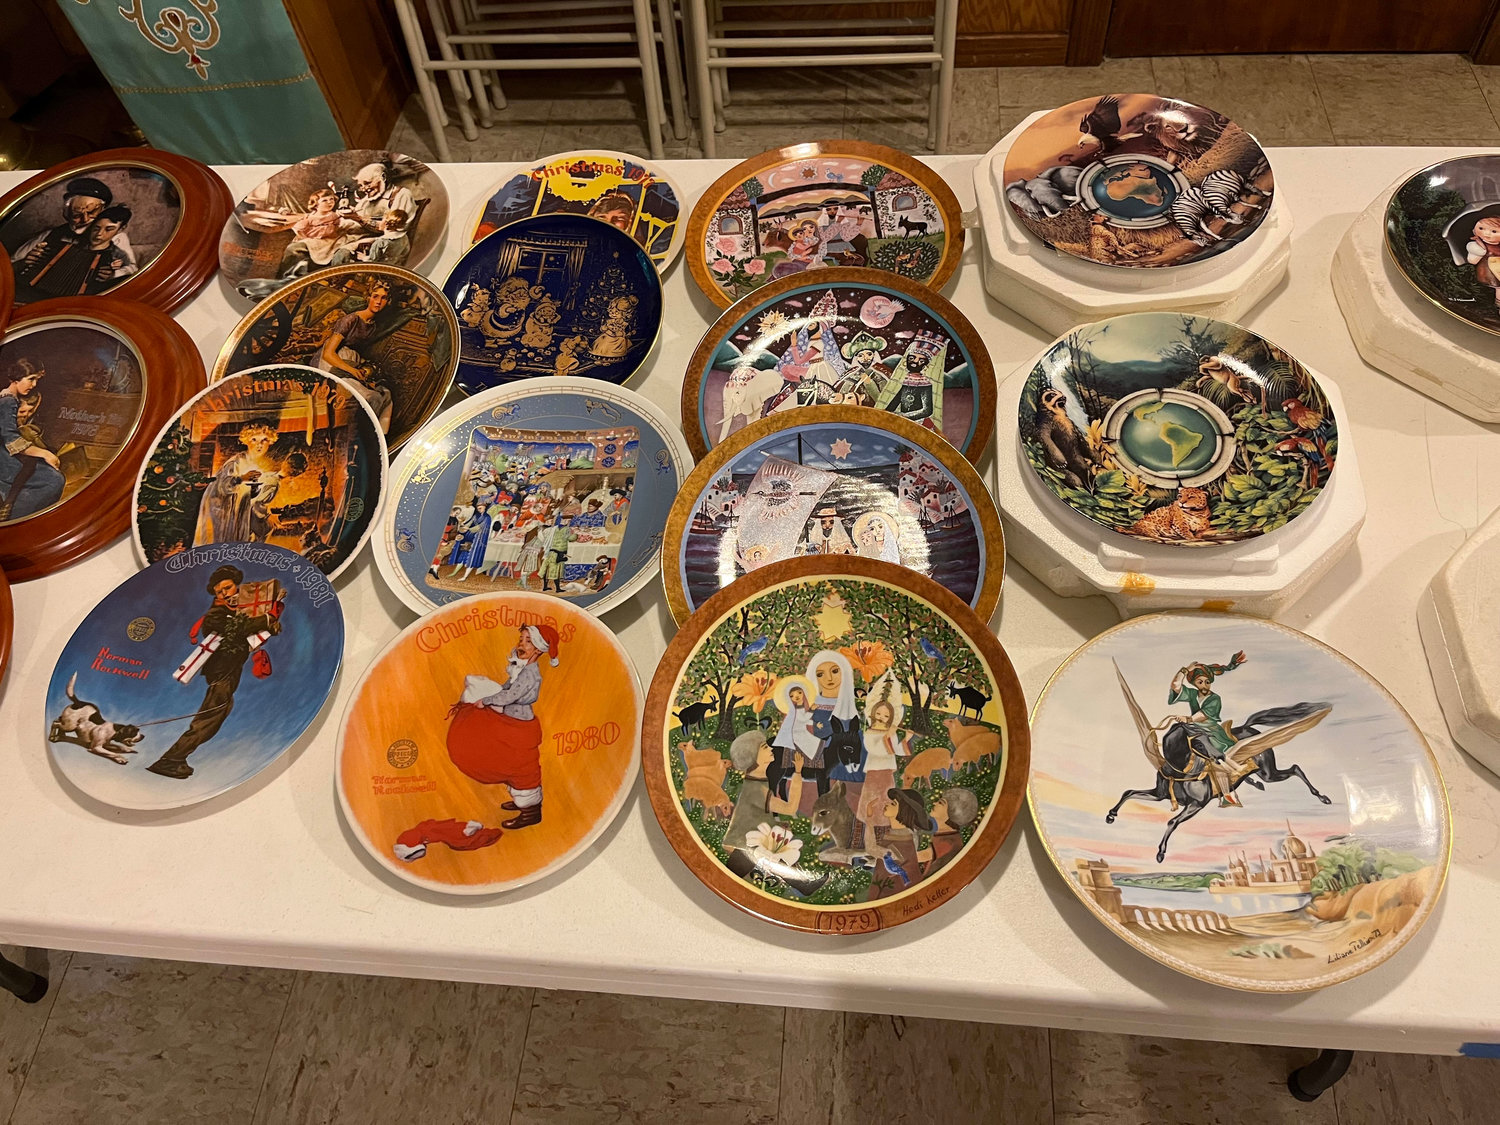 Decorative plates were among the numerous items for sale at the event.